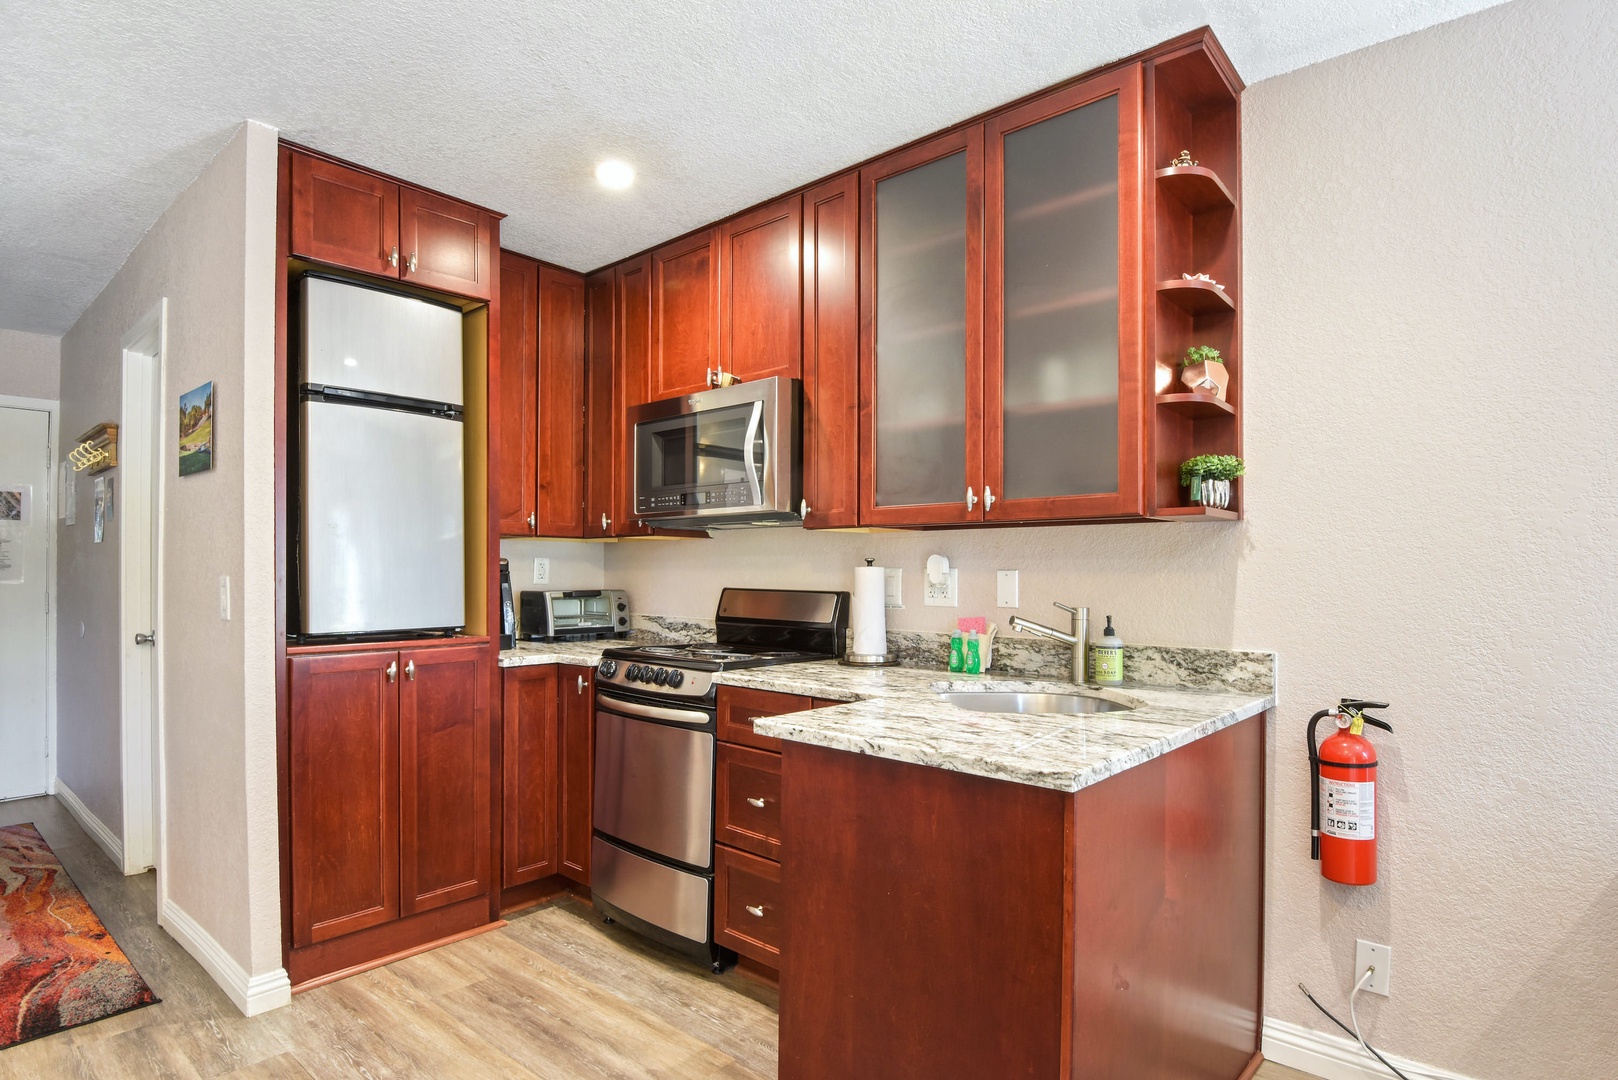 Kitchen with toaster oven, Keurig, slow cooker and more